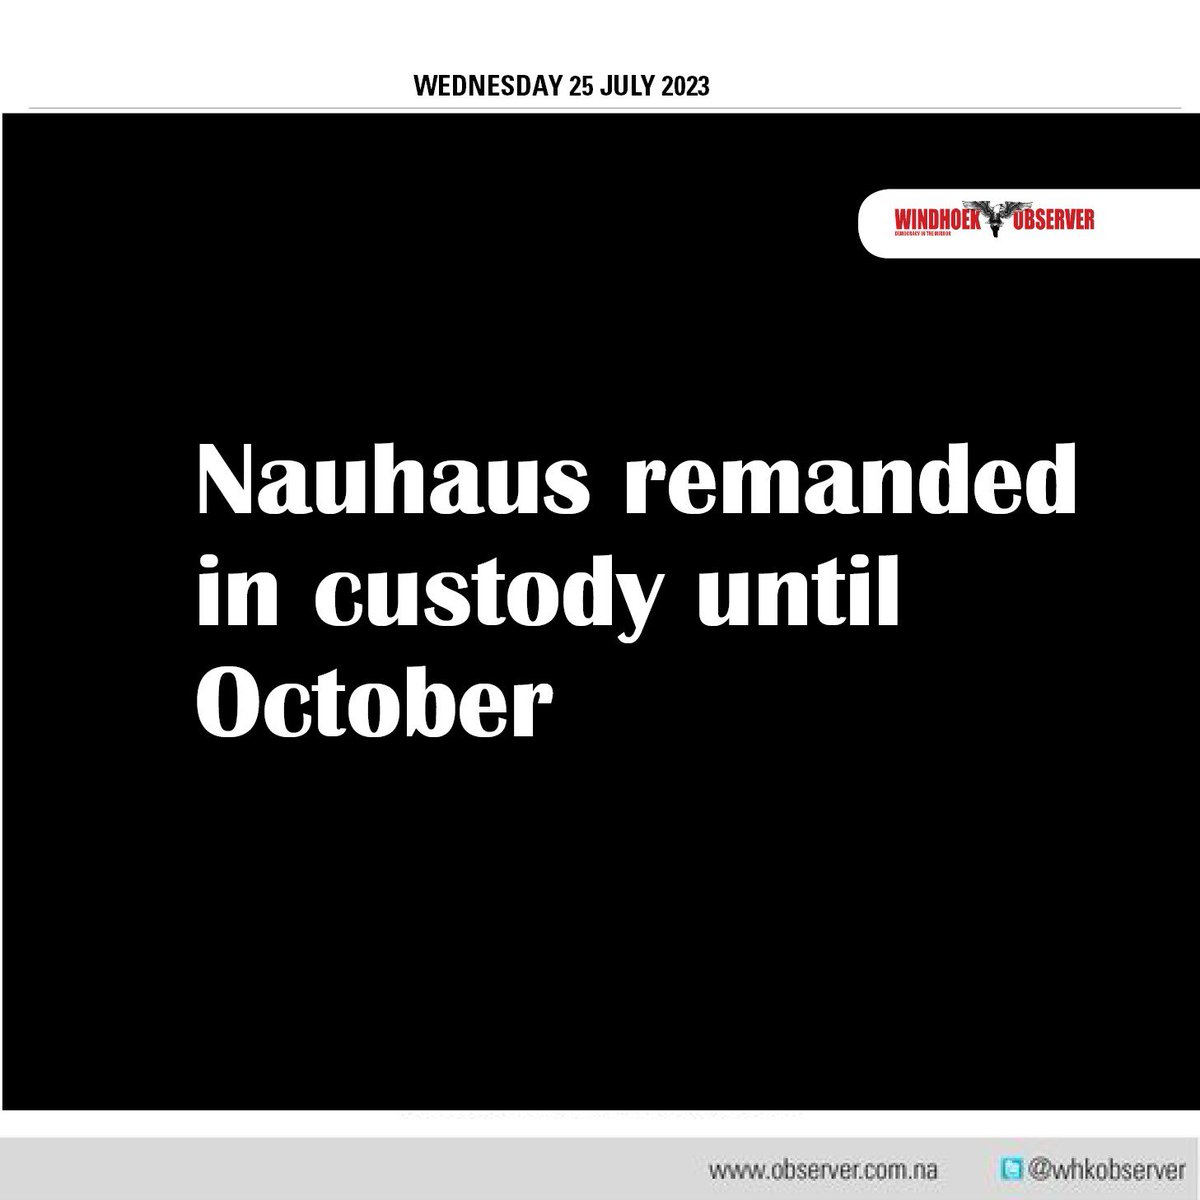 More charges were levelled against Antje Nauhaus, the 34-year-old woman that was arrested on Sunday in Swakopmund in connection with the deadly helicopter crash which cost the lives of two men. https://t.co/nWSJZdpIhz